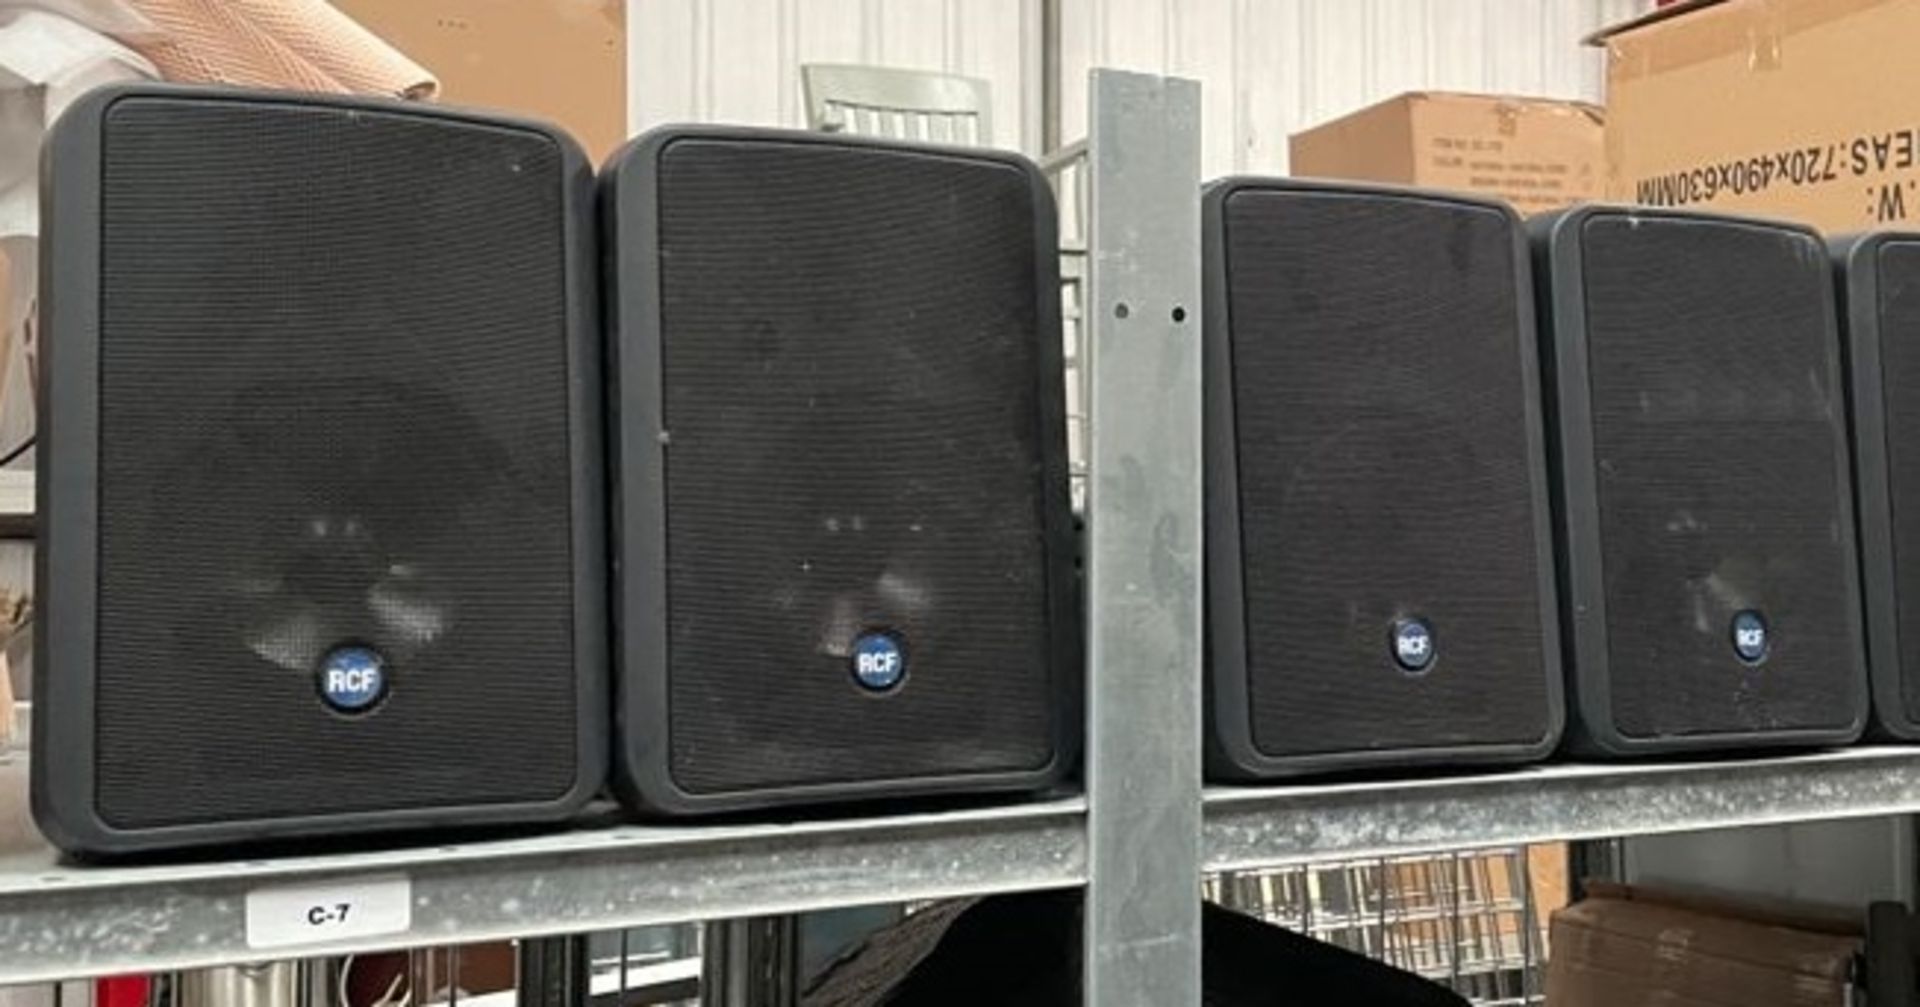 4 x RCF 175-Watt Two-Way Compact Monitor Speakers - Model Monitor 55 - RRP £492 - Ref: WH3 - CL999 - - Image 6 of 8